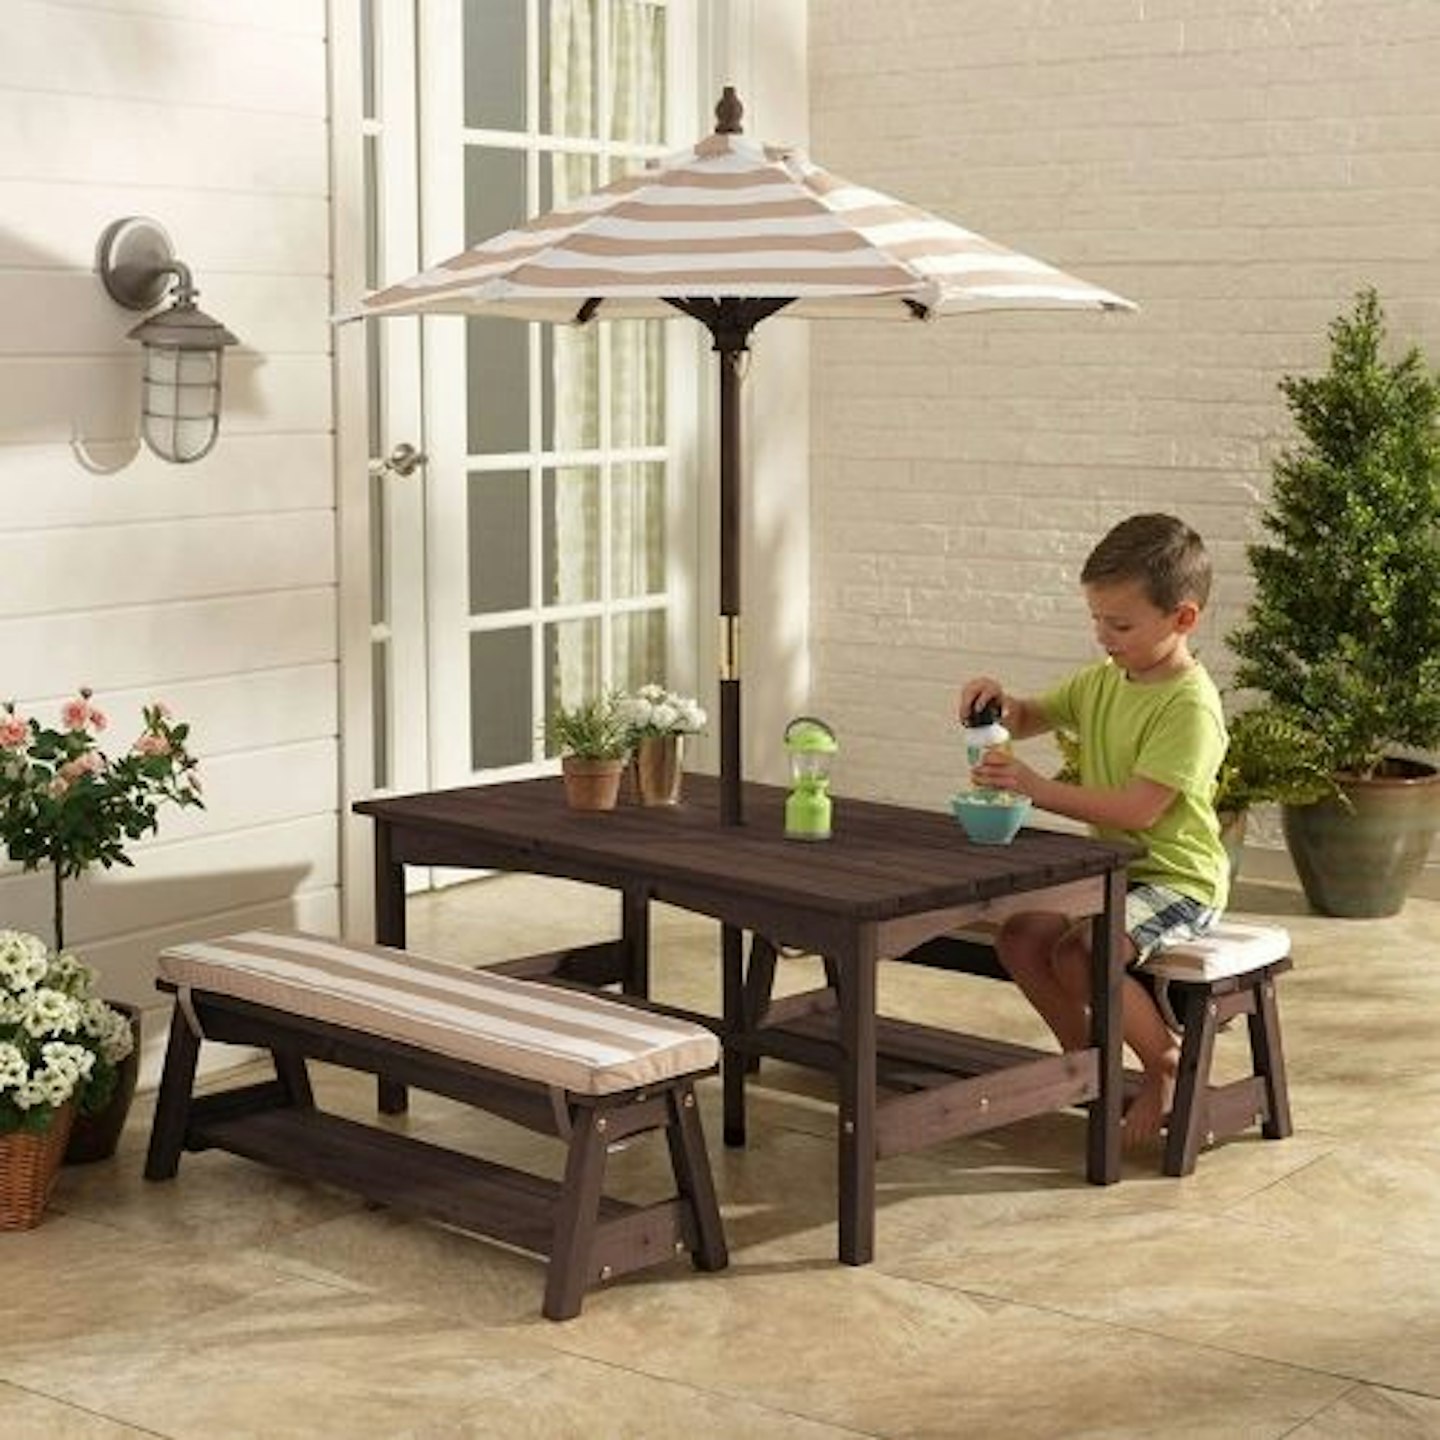 KidKraft Outdoor Table and Bench Set with Cushions and Umbrella